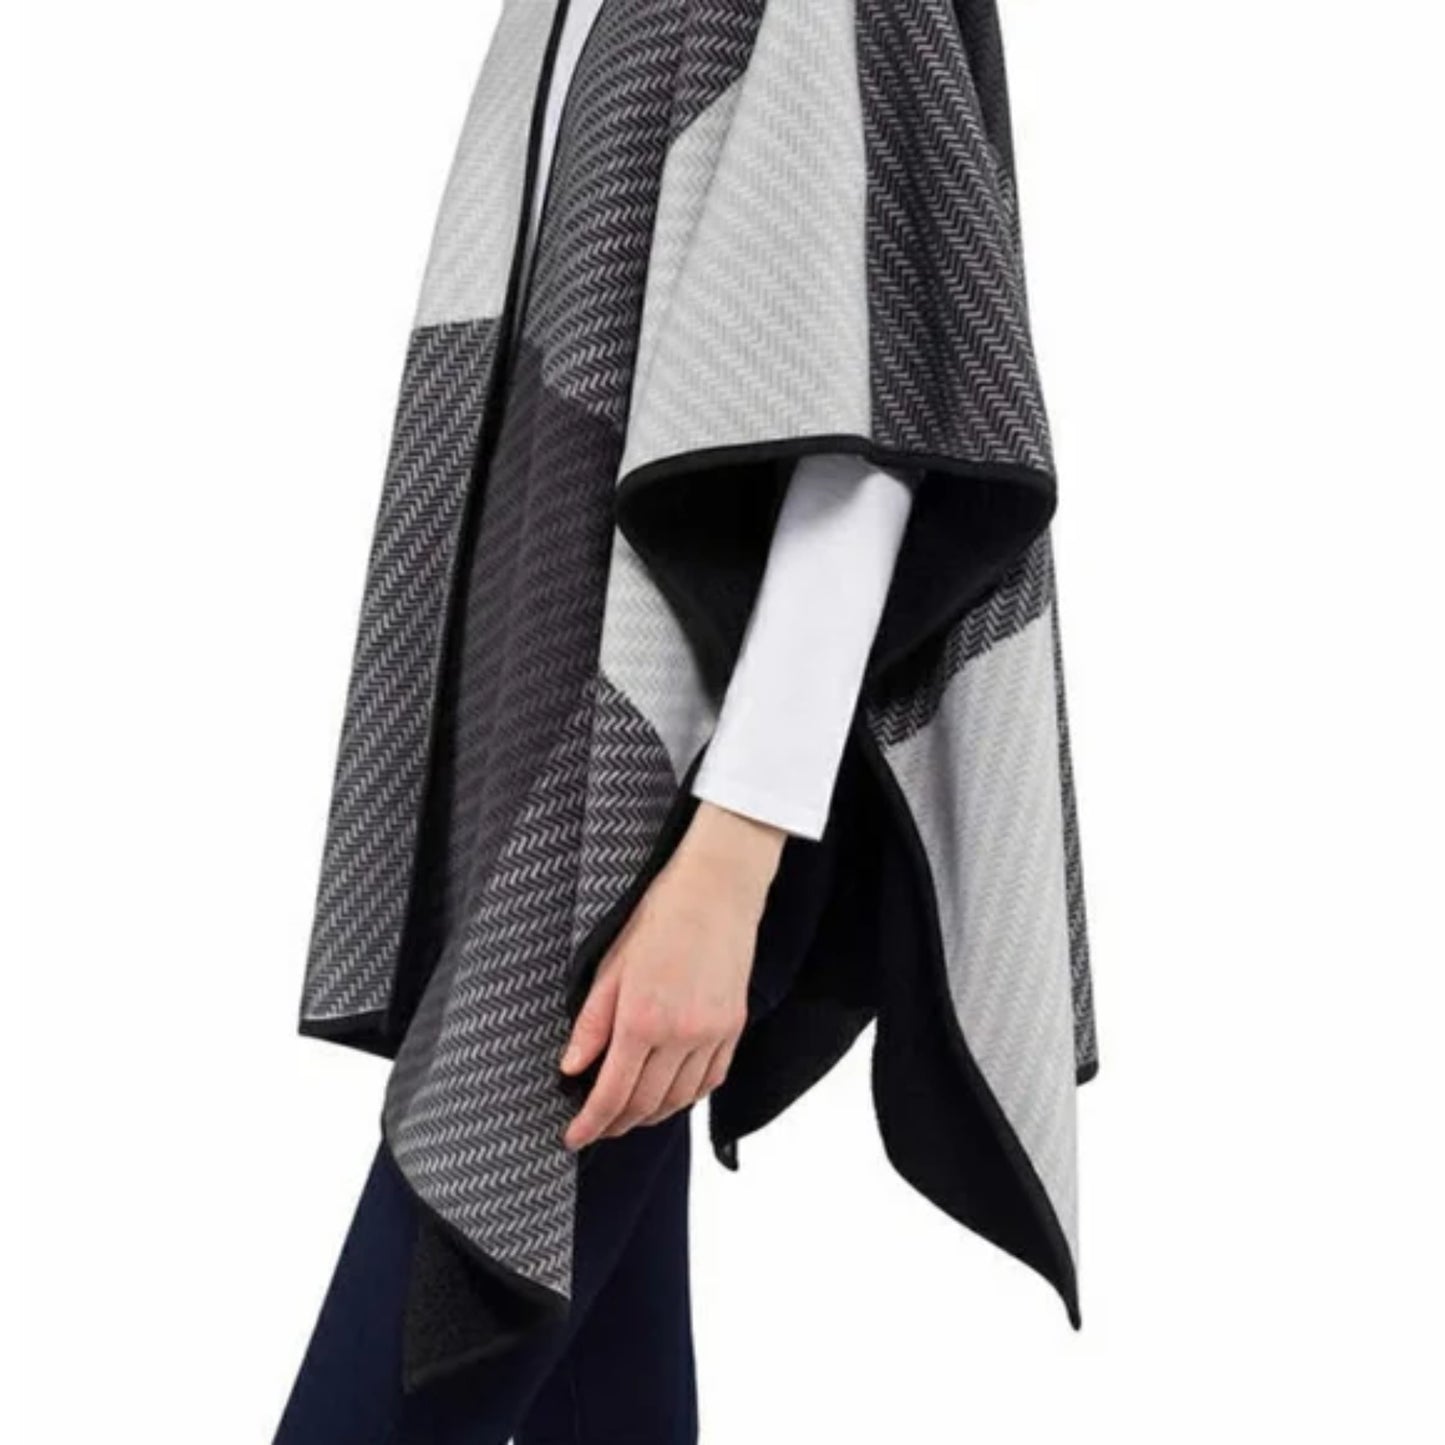 Ike Behar Women's Reversible Wrap with High Pile Fleece Black and Gray Color Block